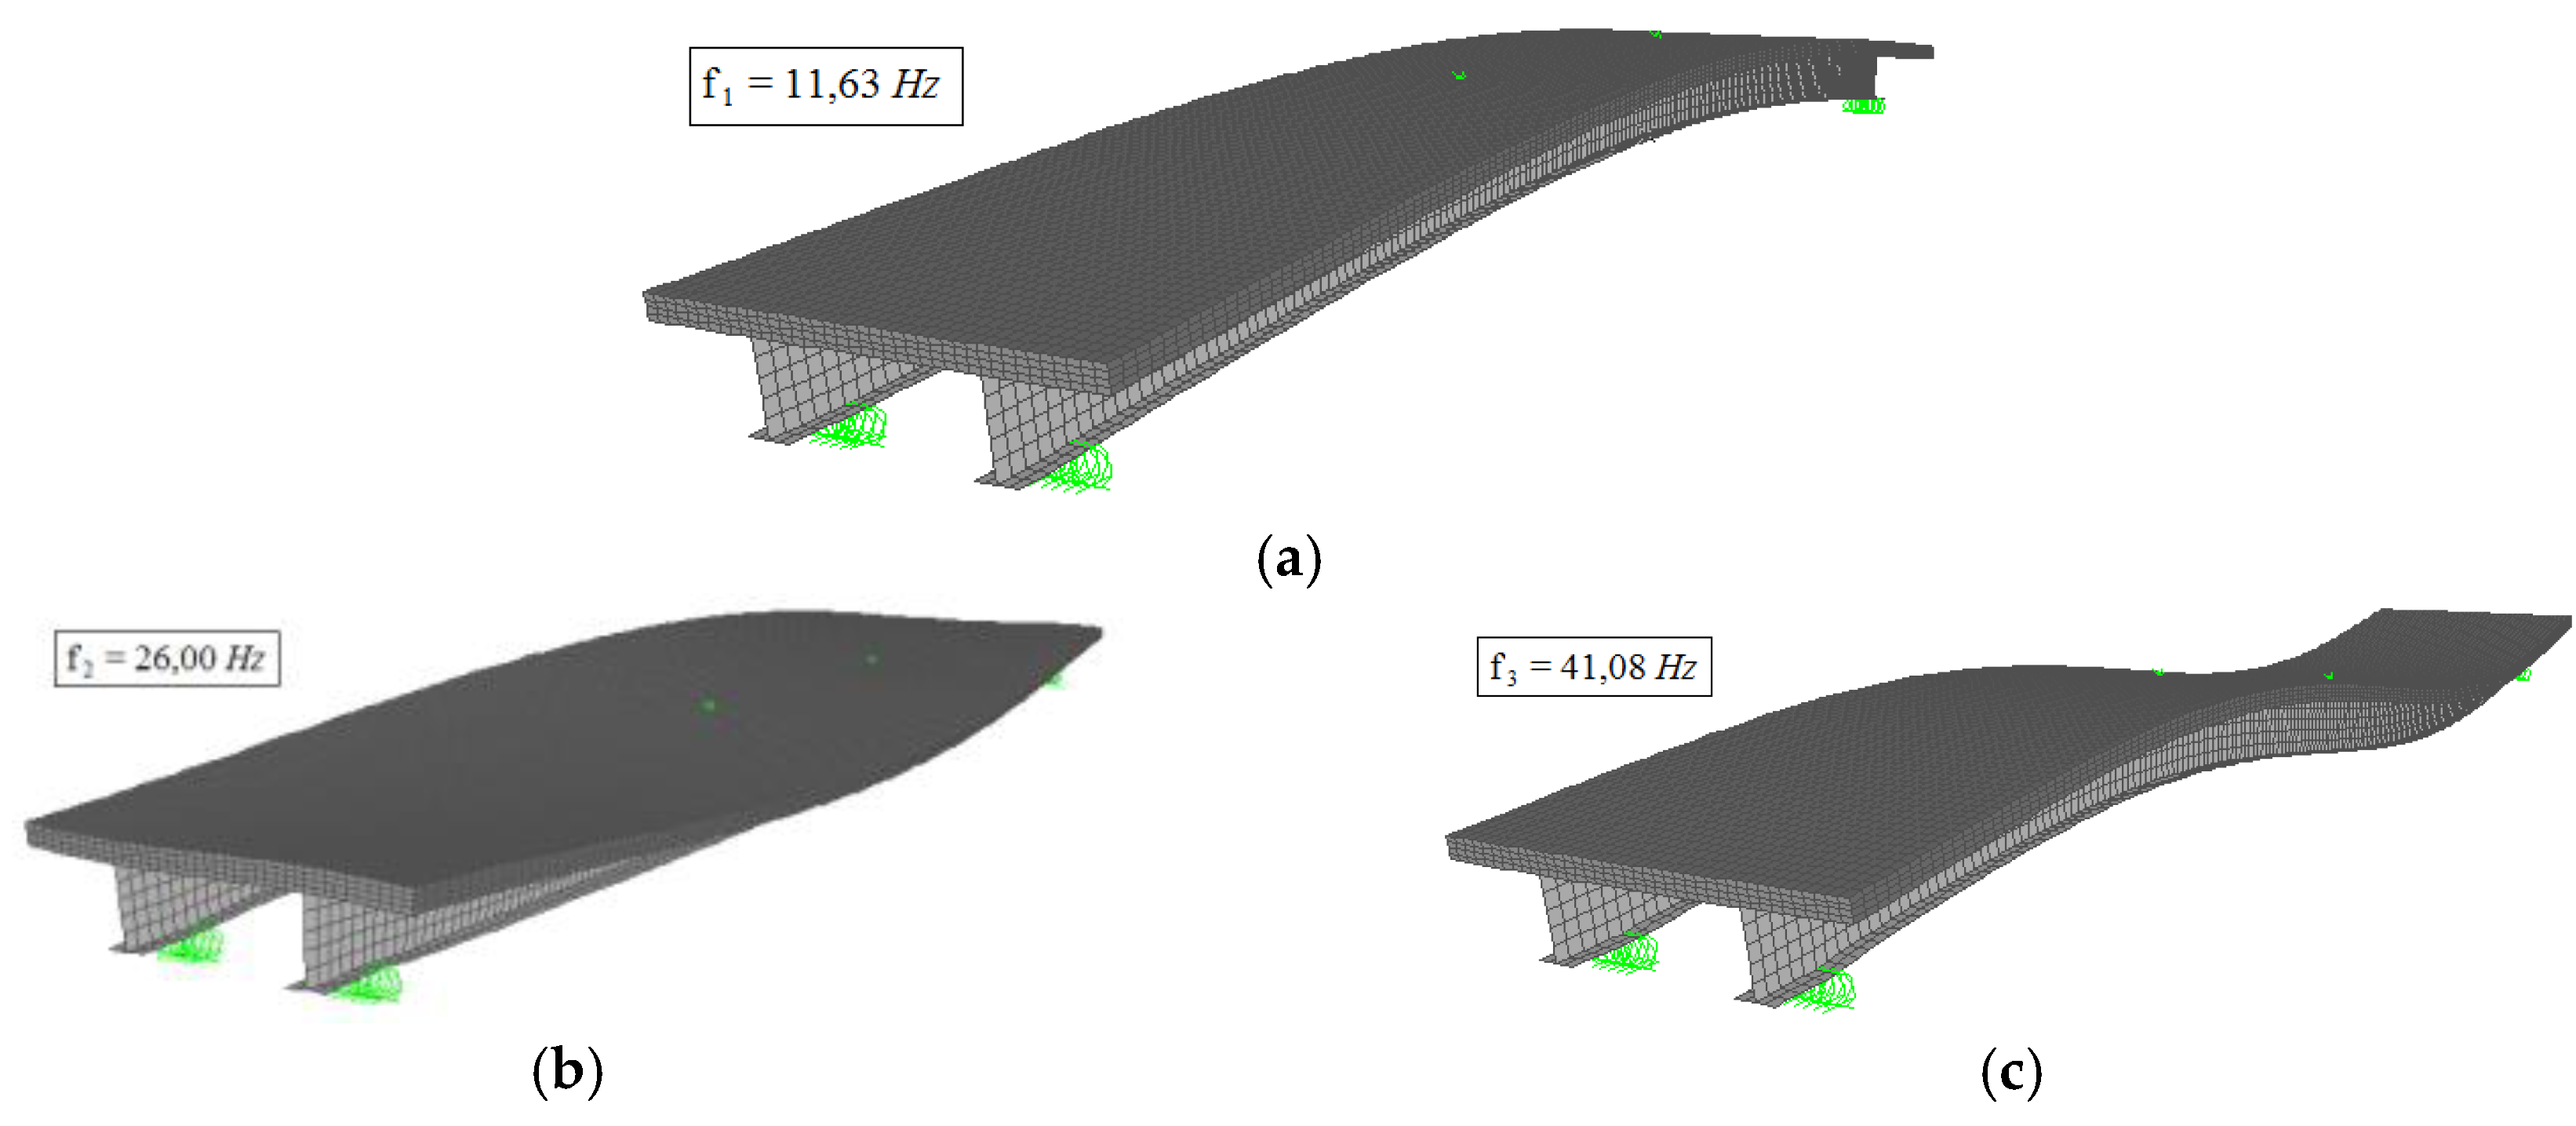 J. Compos. Sci. | Free Full-Text | Vibration Analysis of a Composite  Concrete/GFRP Slab Induced by Human Activities | HTML